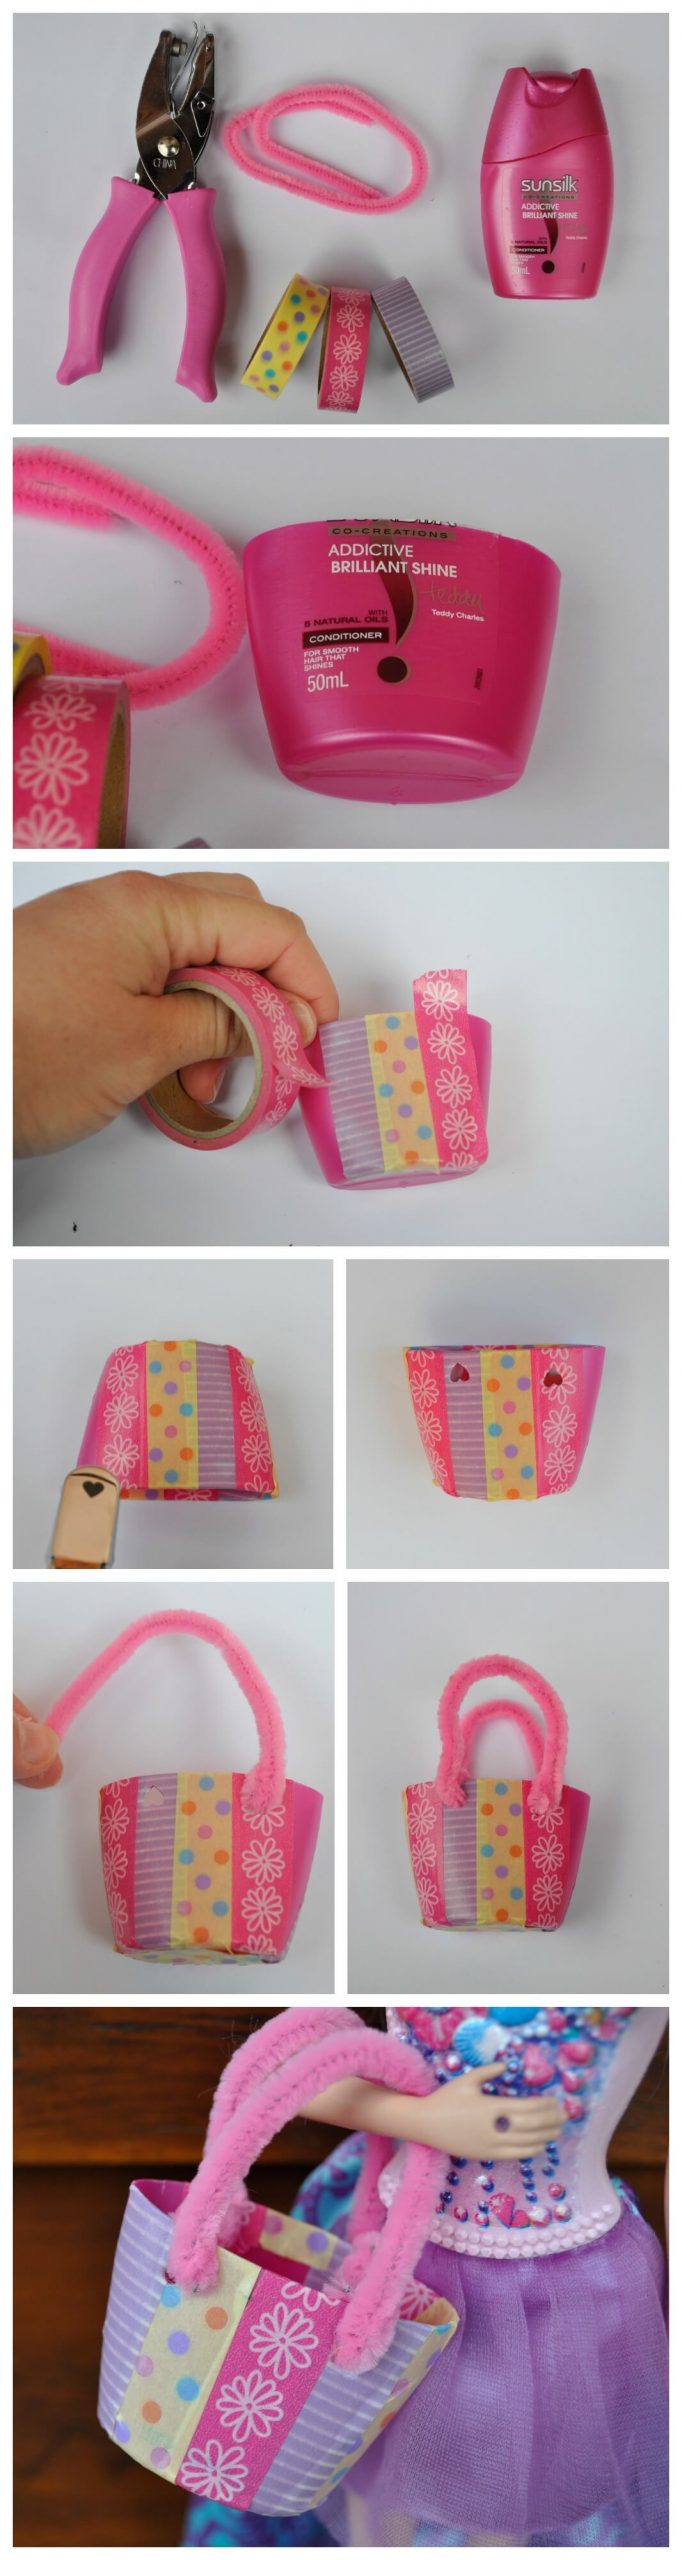 Barbie Tote Bag Craft Activity Using Shampoo Bottle, Pipe Cleaners & Washi Tape Barbie Day Crafts &amp; Activities for Kids